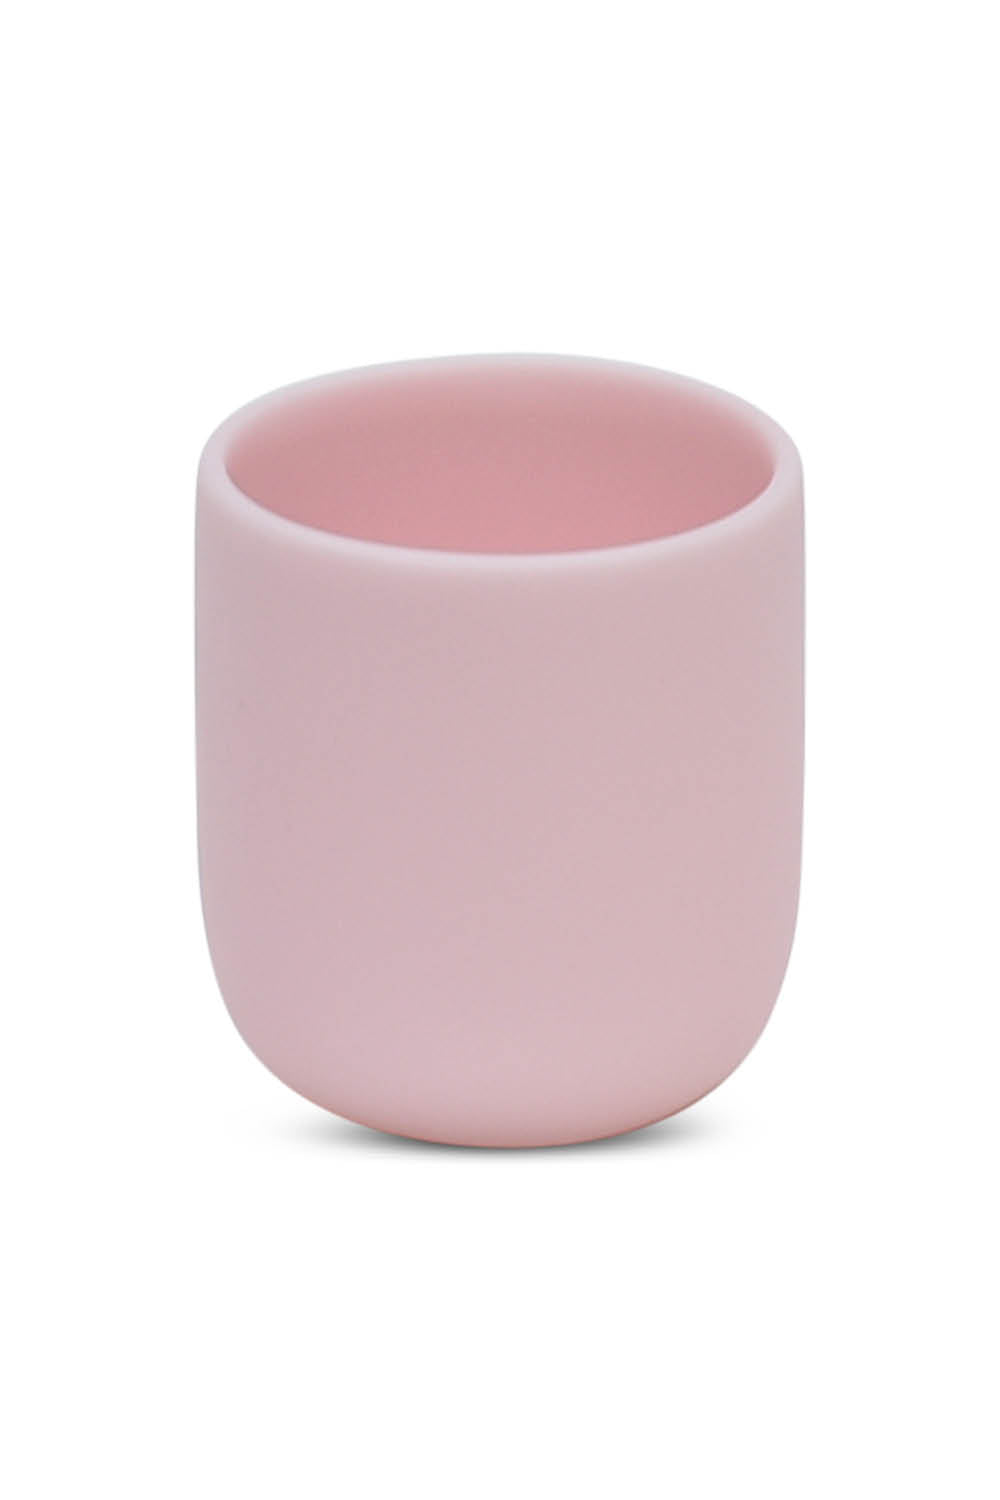 MODERN Short Cup in Pale Rose